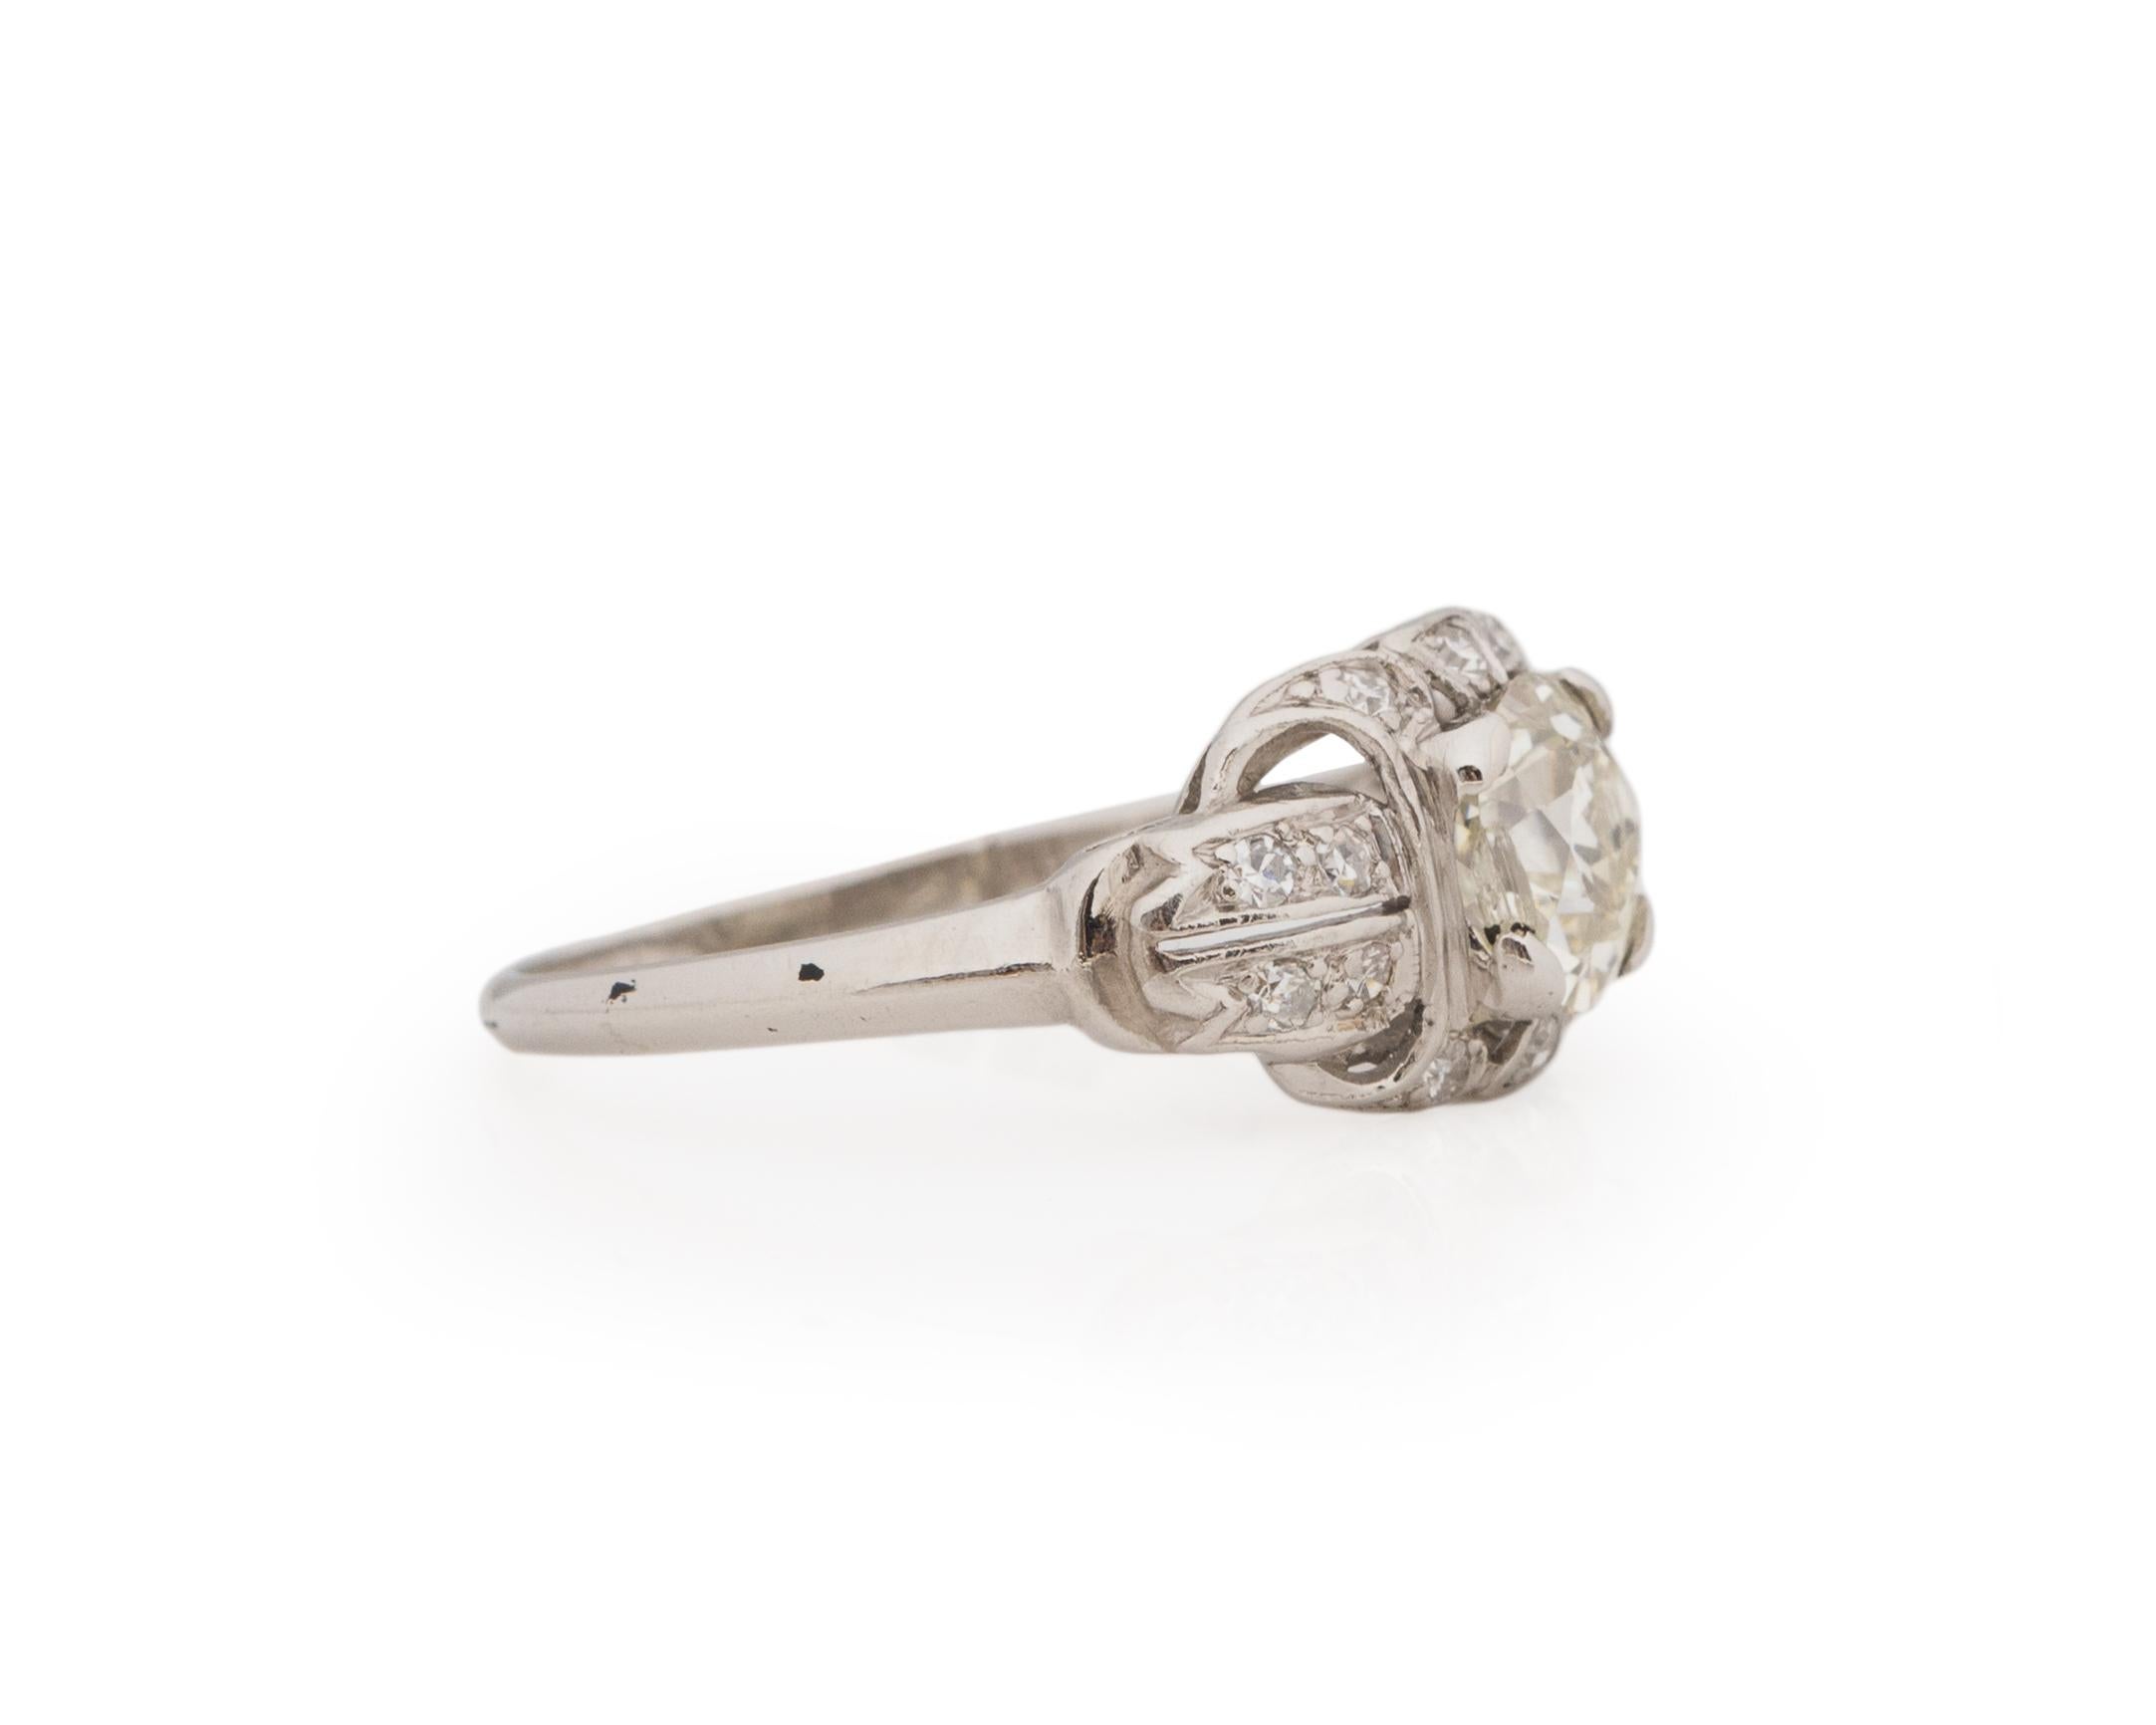 Ring Size: 5.75
Metal Type: Platinum [Hallmarked, and Tested]
Weight: 3.3 grams

Diamond Details:
GIA REPORT #: 5222429132
Weight: 1.05ct
Cut: Old Mine brilliant (antique cushion)
Color: L
Clarity: VS1
Measurements: 6.49mm x 5.97mm x 4.26mm

Finger